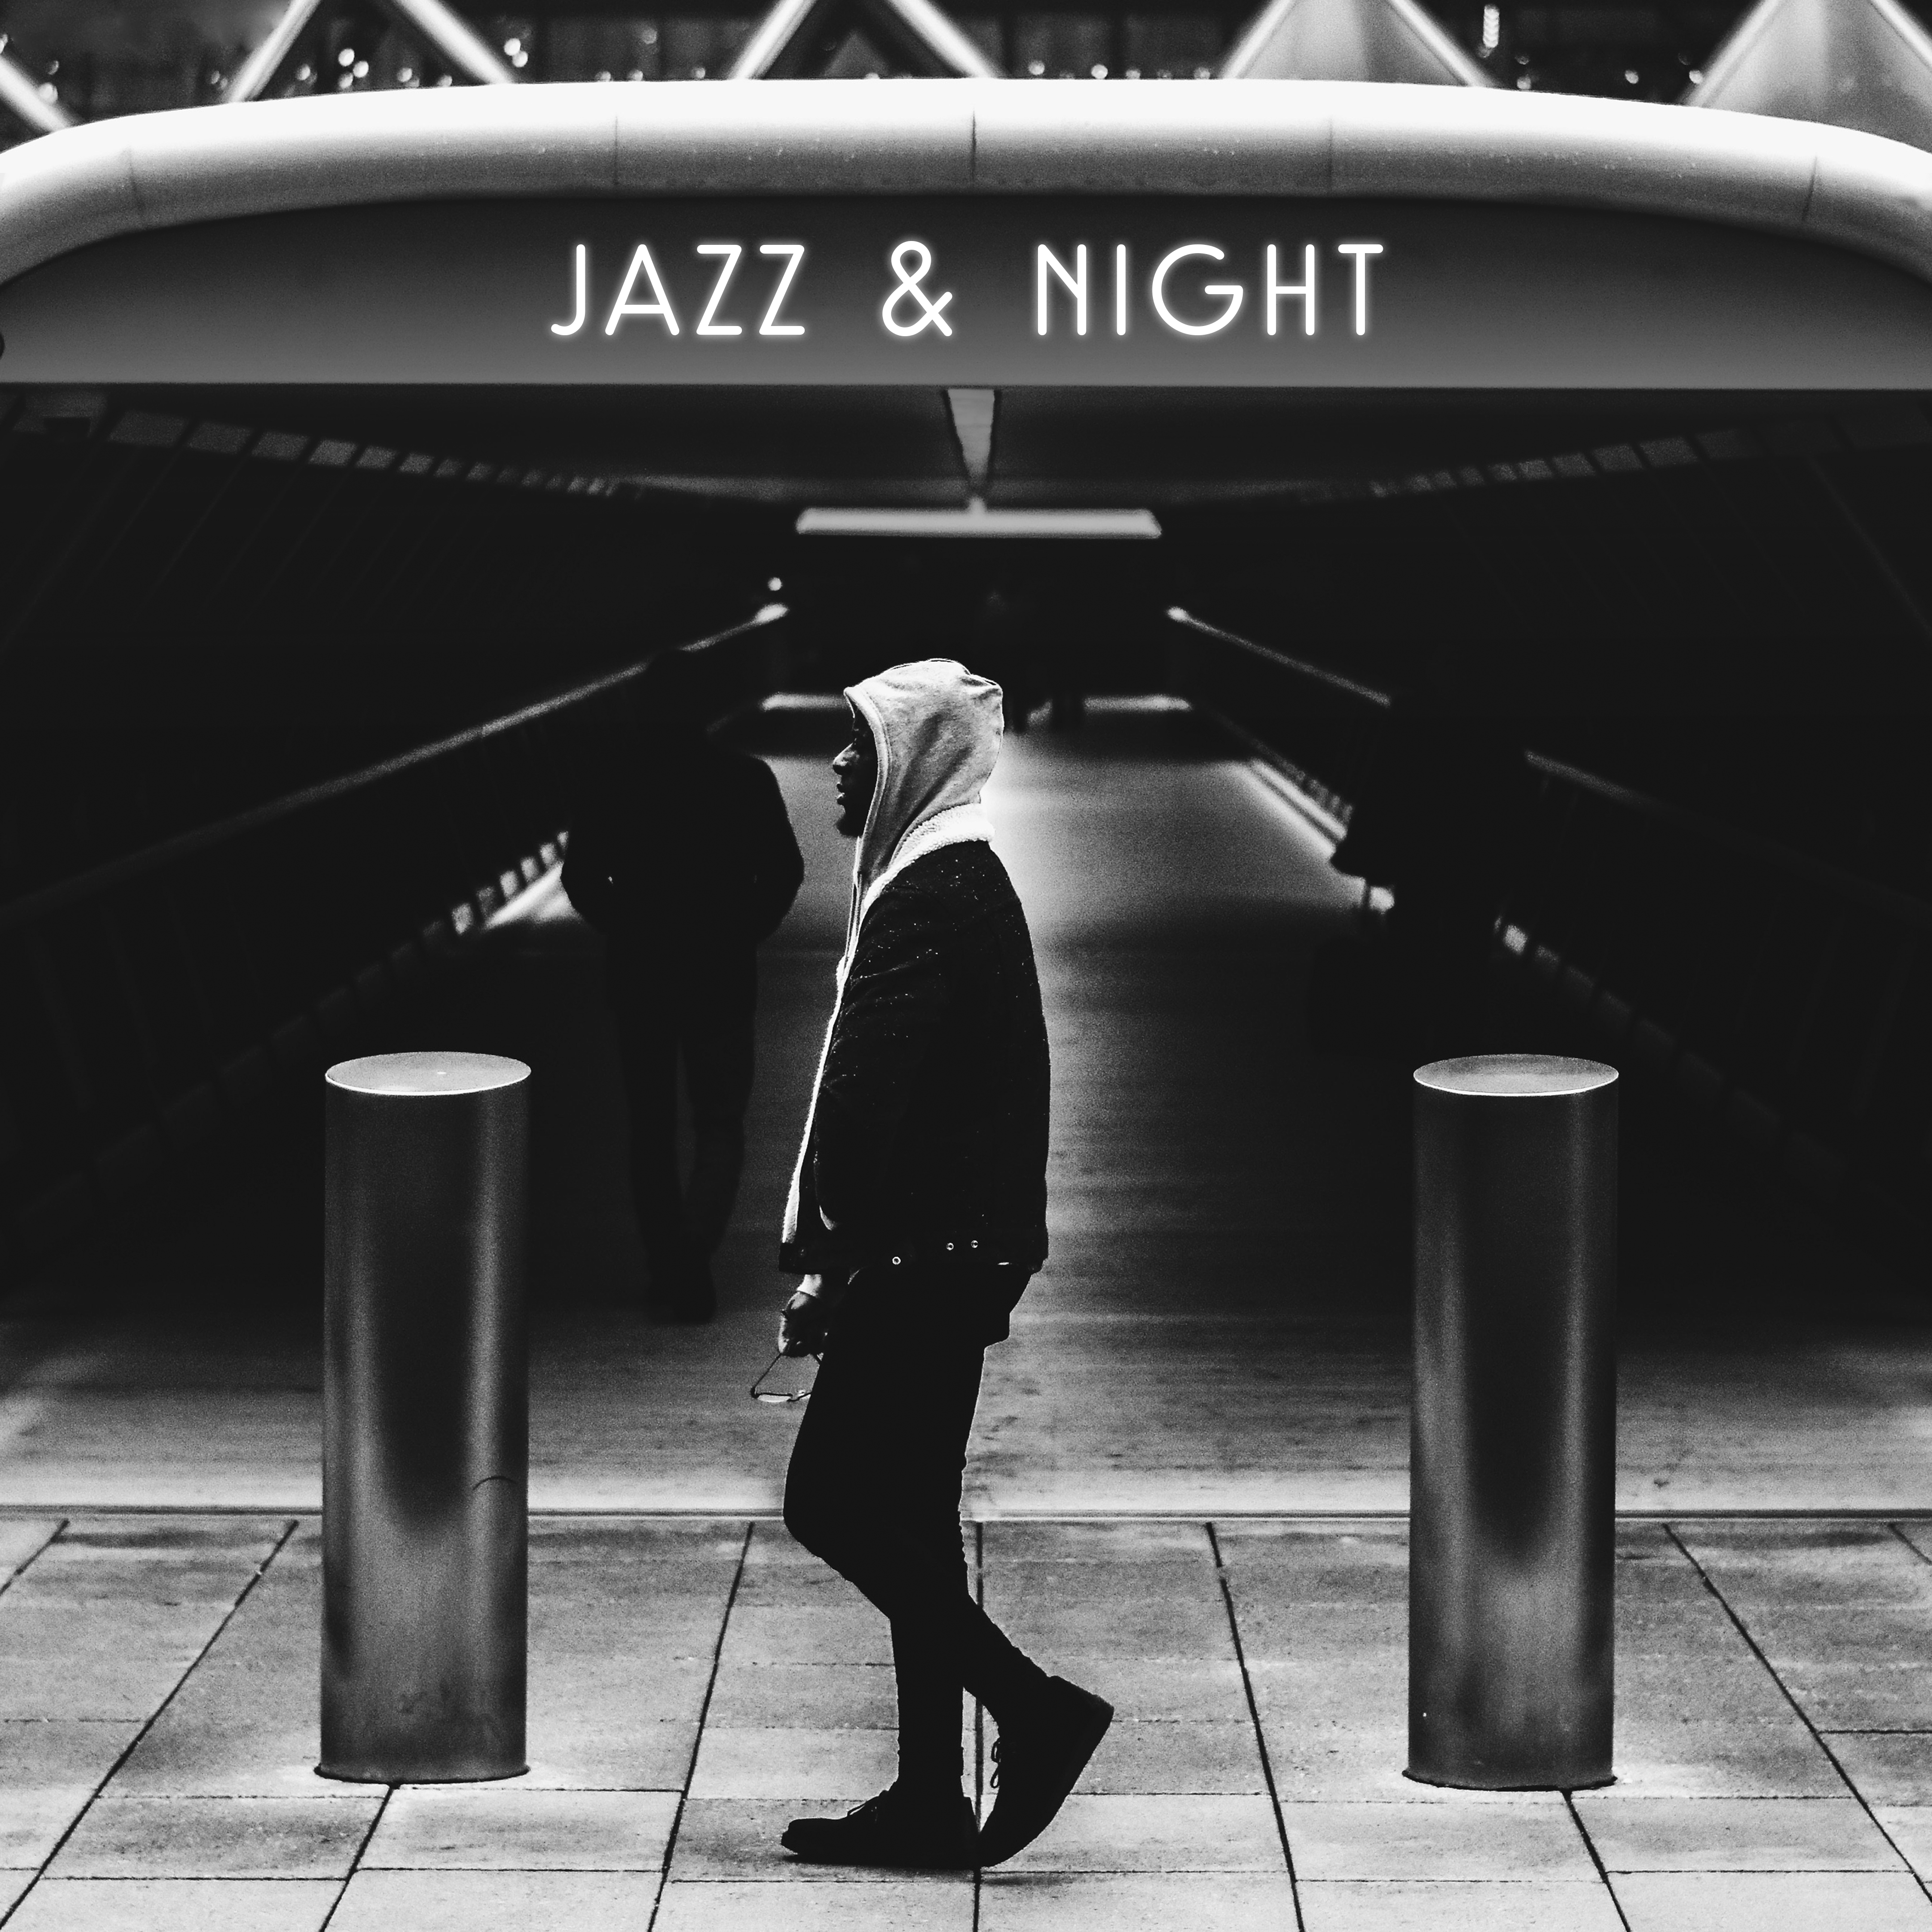 Jazz  Night  Relaxation Sounds, Deep Relax, Jazz Guitar, Calm Piano Music, Instrumental Songs at Night